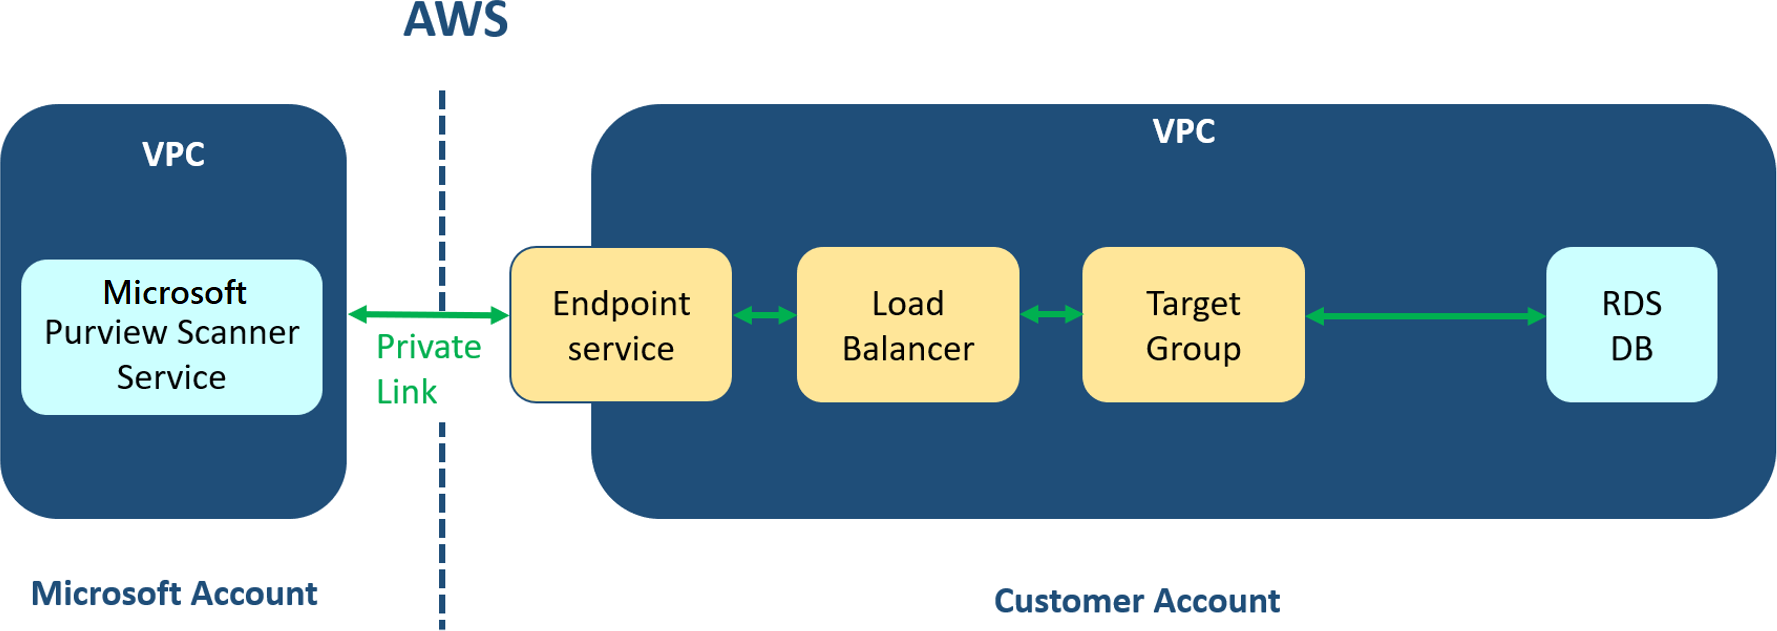 Diagram of the Multicloud Scanning Connectors for Microsoft Purview service in a VPC architecture.